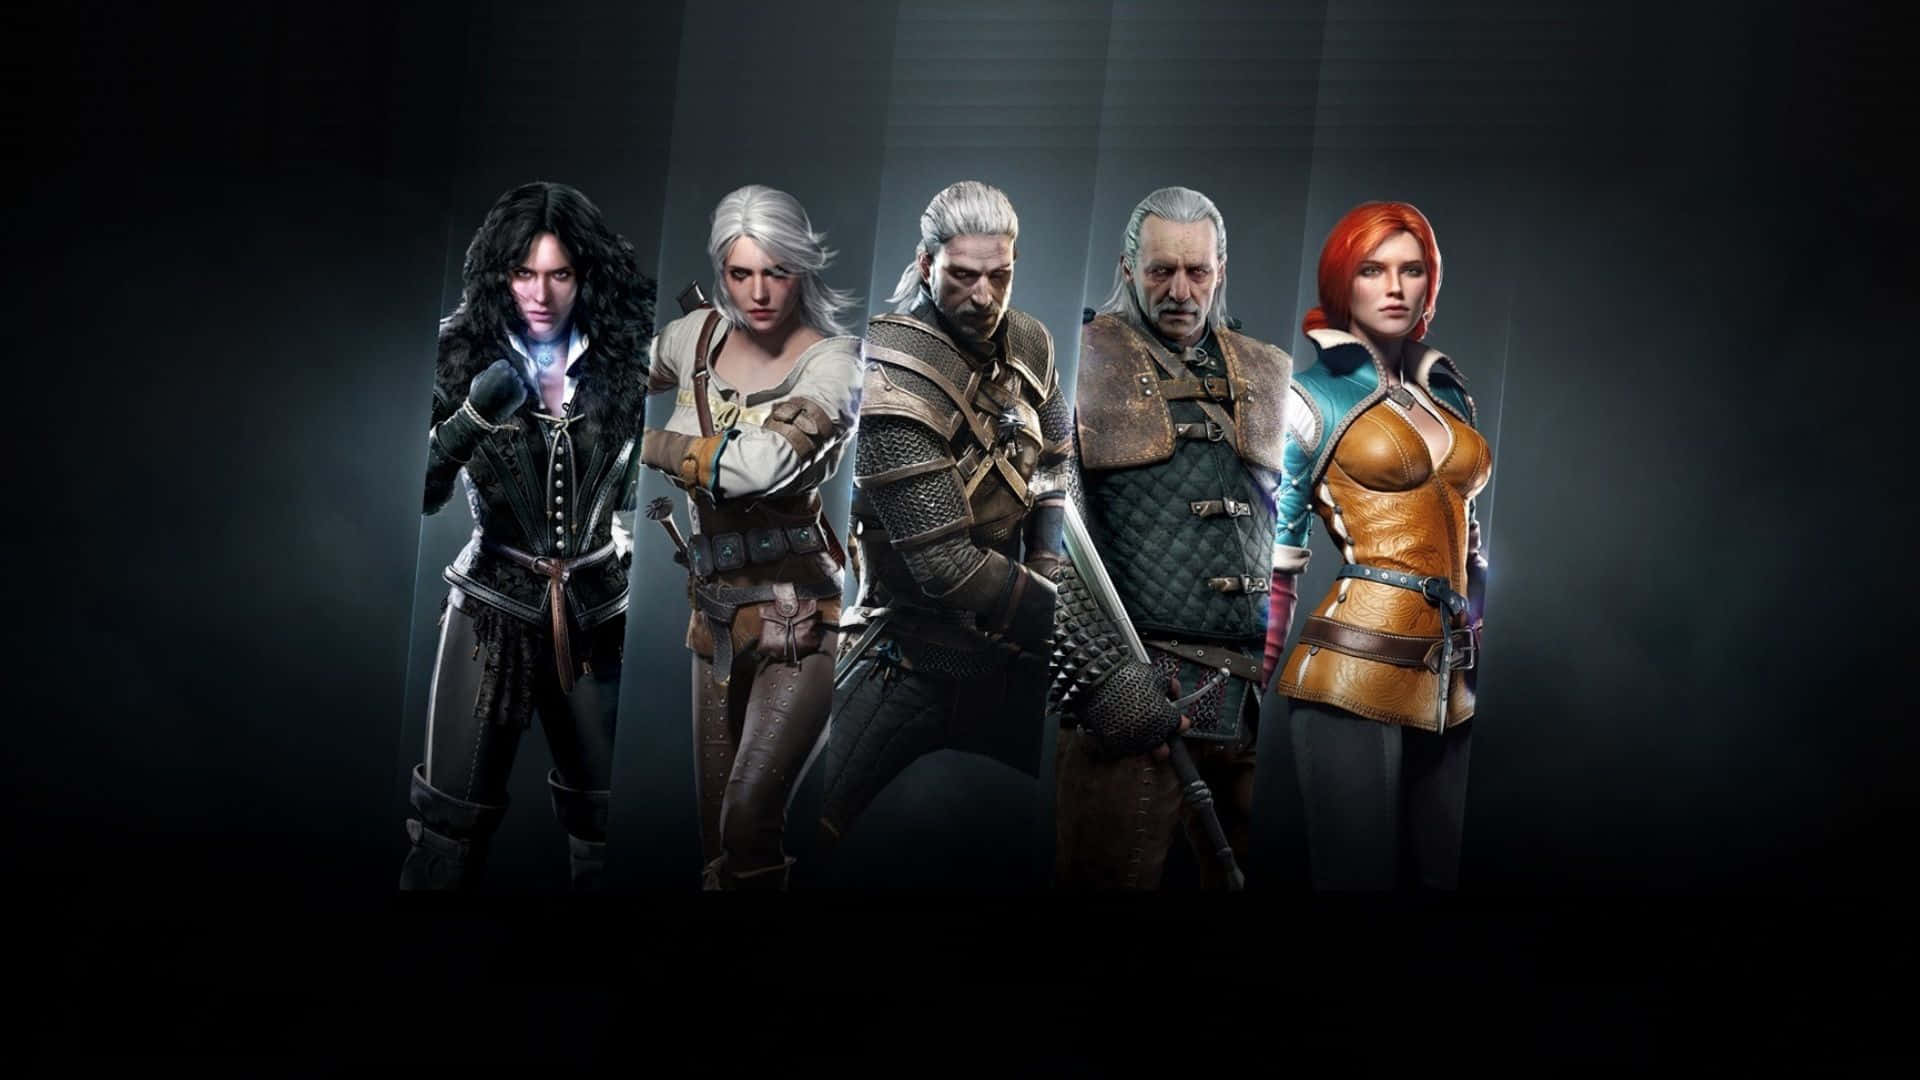 The Witcher 1920x1080 Game Characters Wallpaper